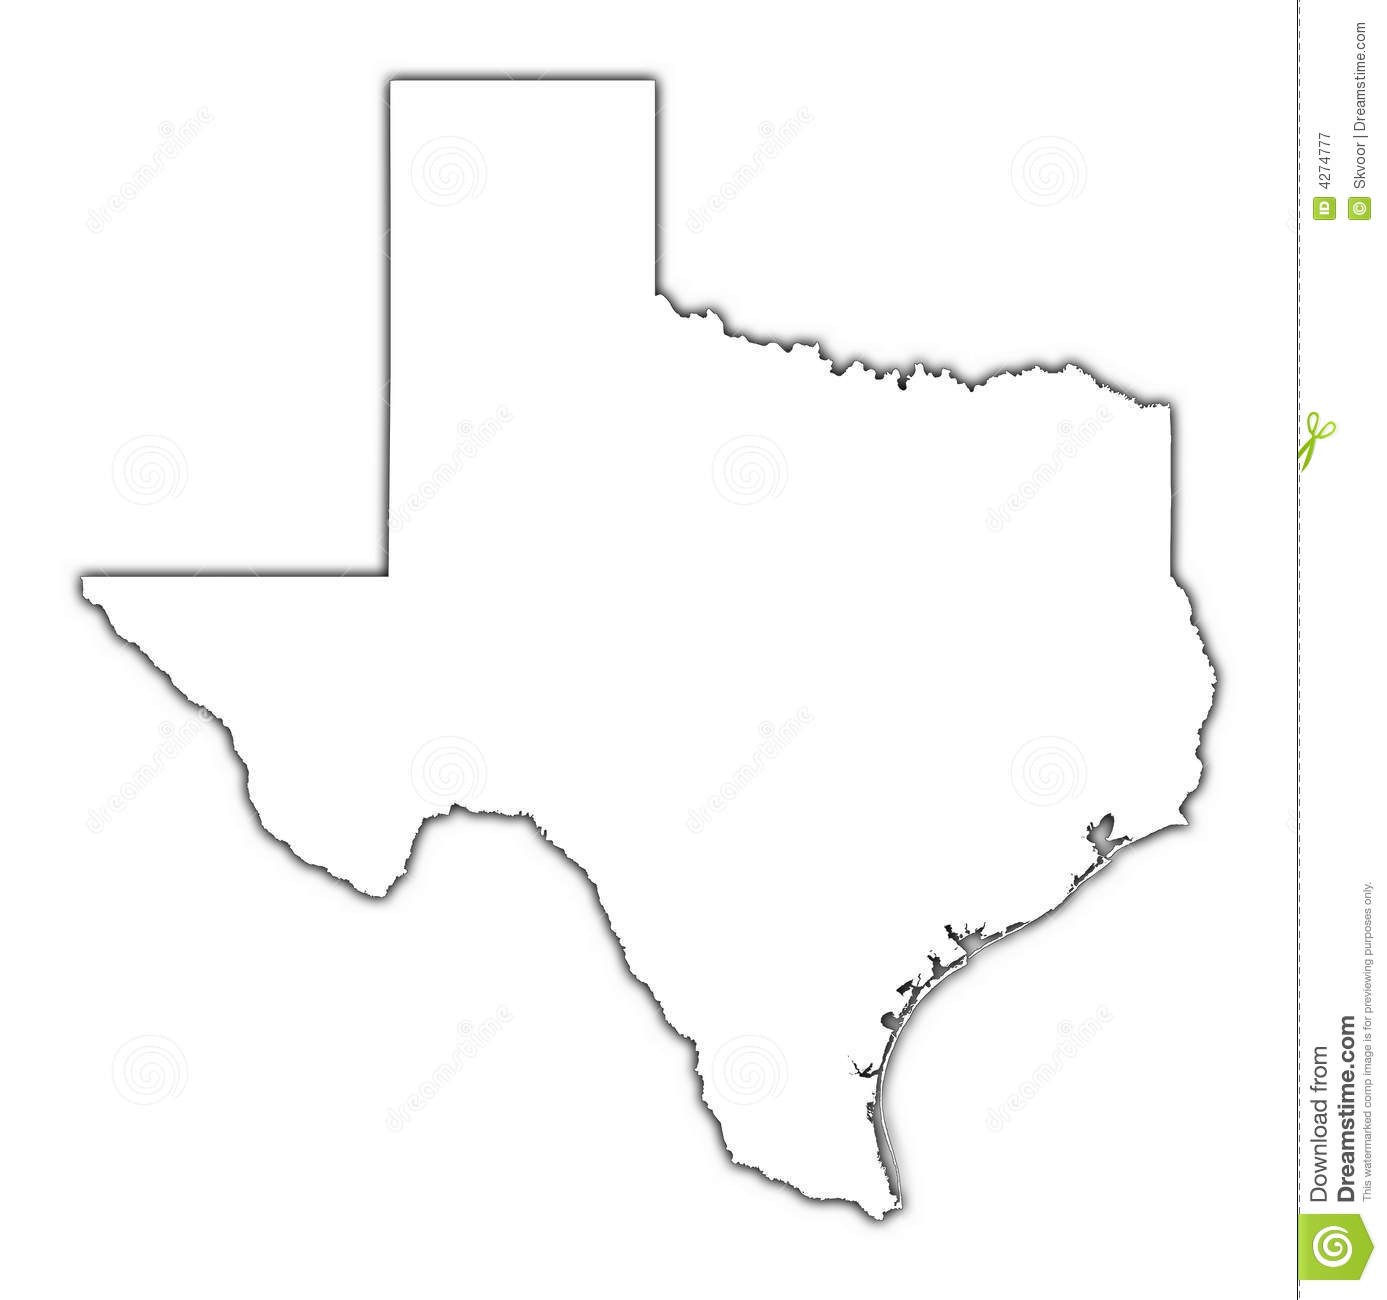 Texas Outline Vector At Collection Of Texas Outline Vector Free For Personal Use 5180